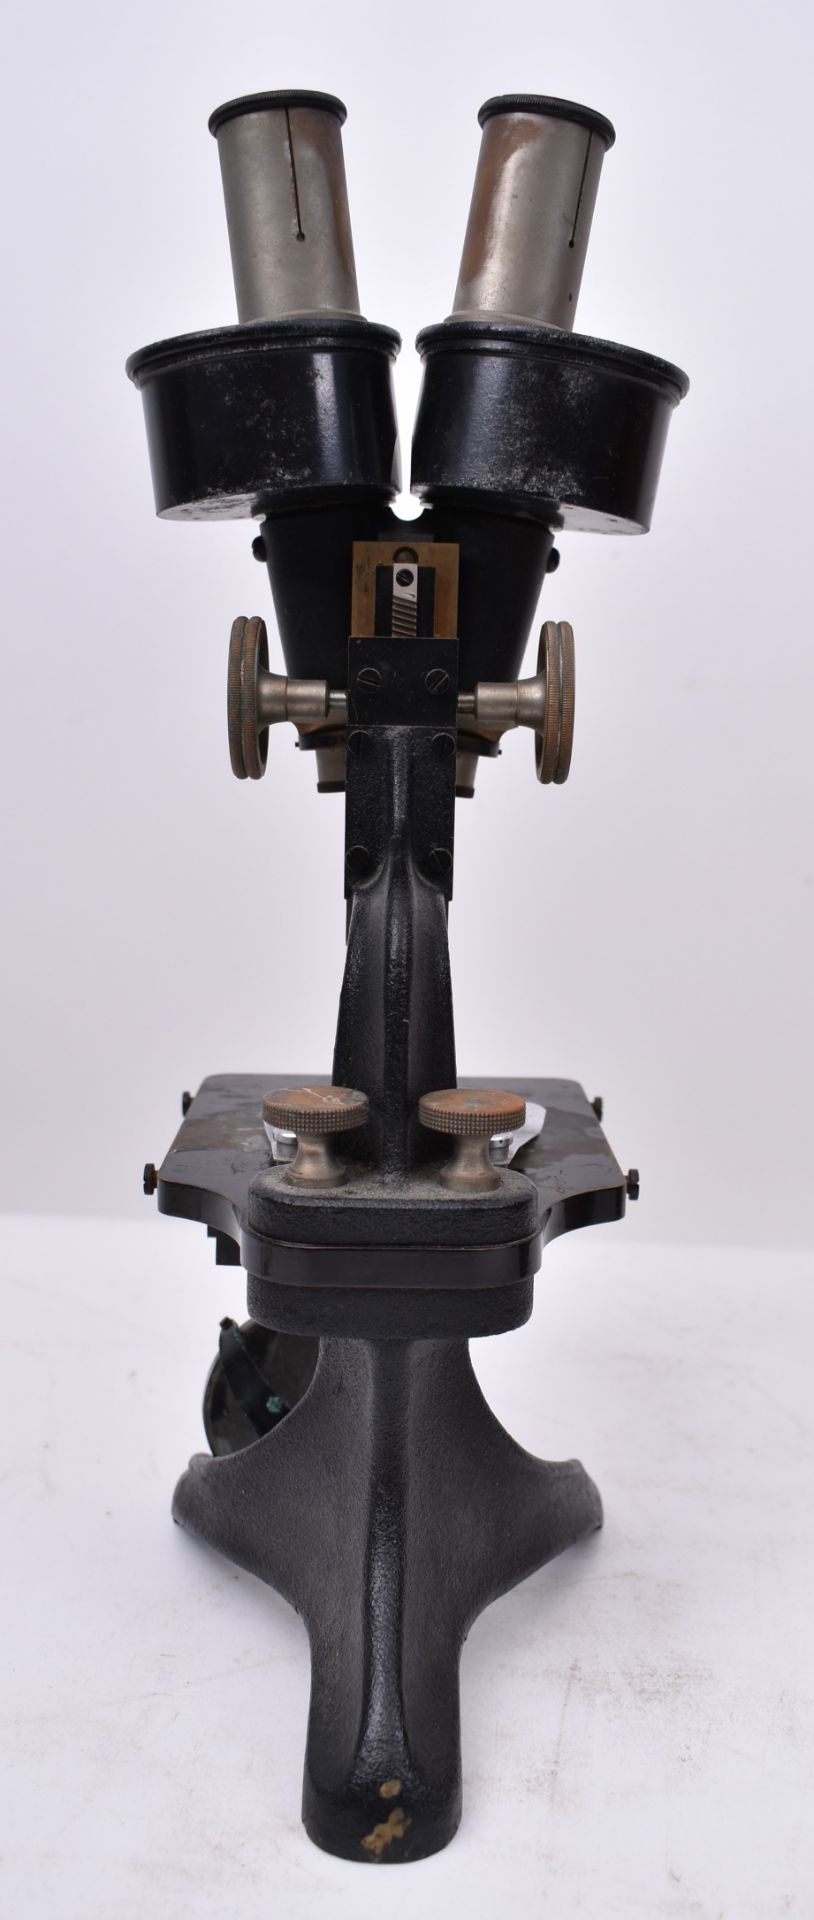 CARL ZEISS - EARLY 20TH CENTURY STEREO MICROSCOPE IN CASE - Image 6 of 10